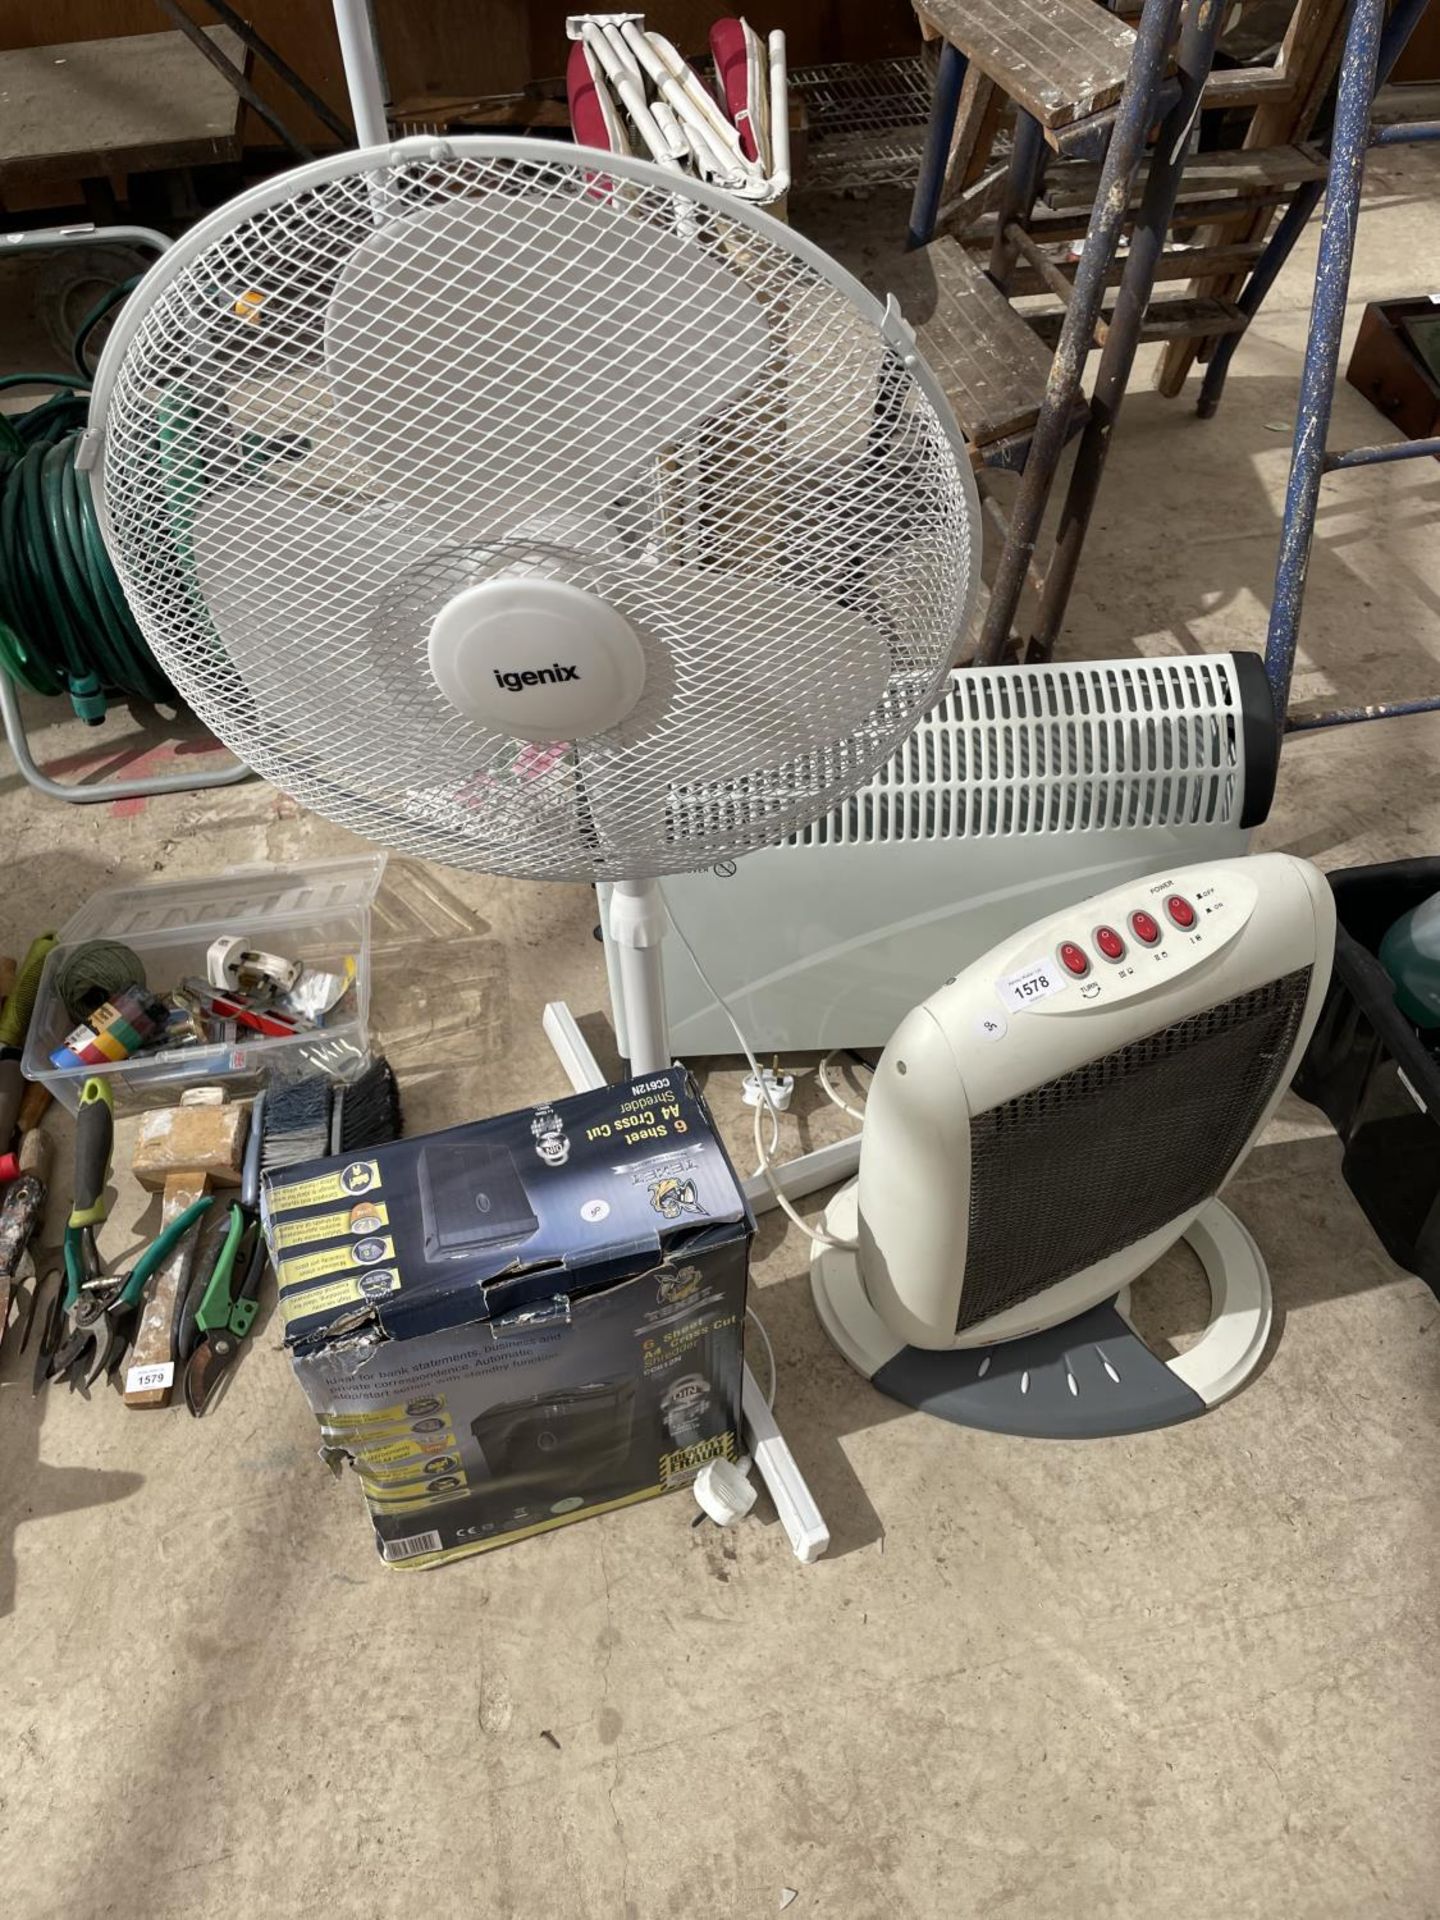 AN ASSORTMENT OF ELECTRIC FANS AND HEATERS